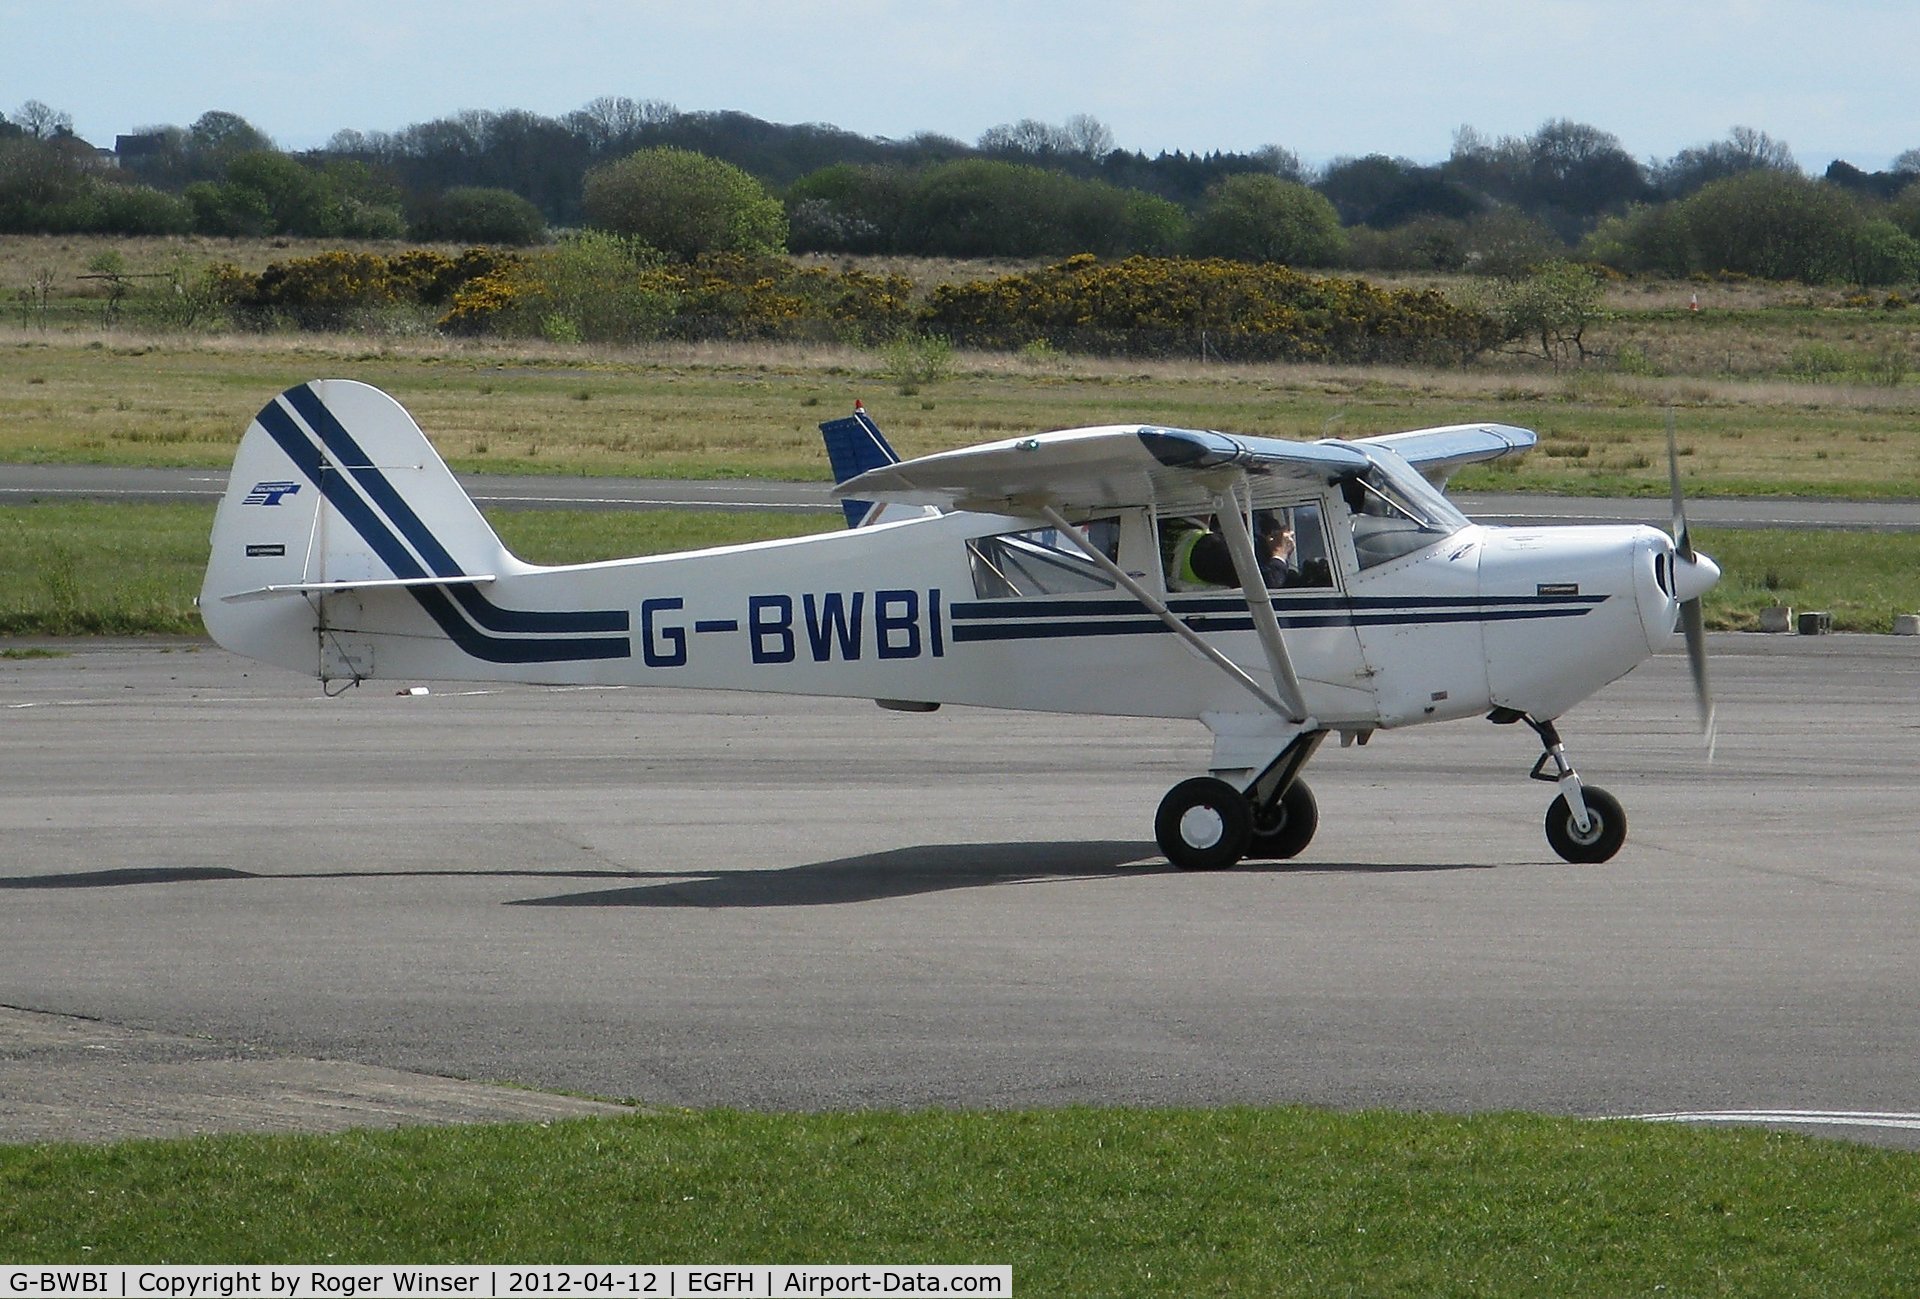 G-BWBI, 1991 Taylorcraft F22A C/N 2207, Resident F-22A (not a Raptor). The only example on the UK register. Previously registered N22UK.